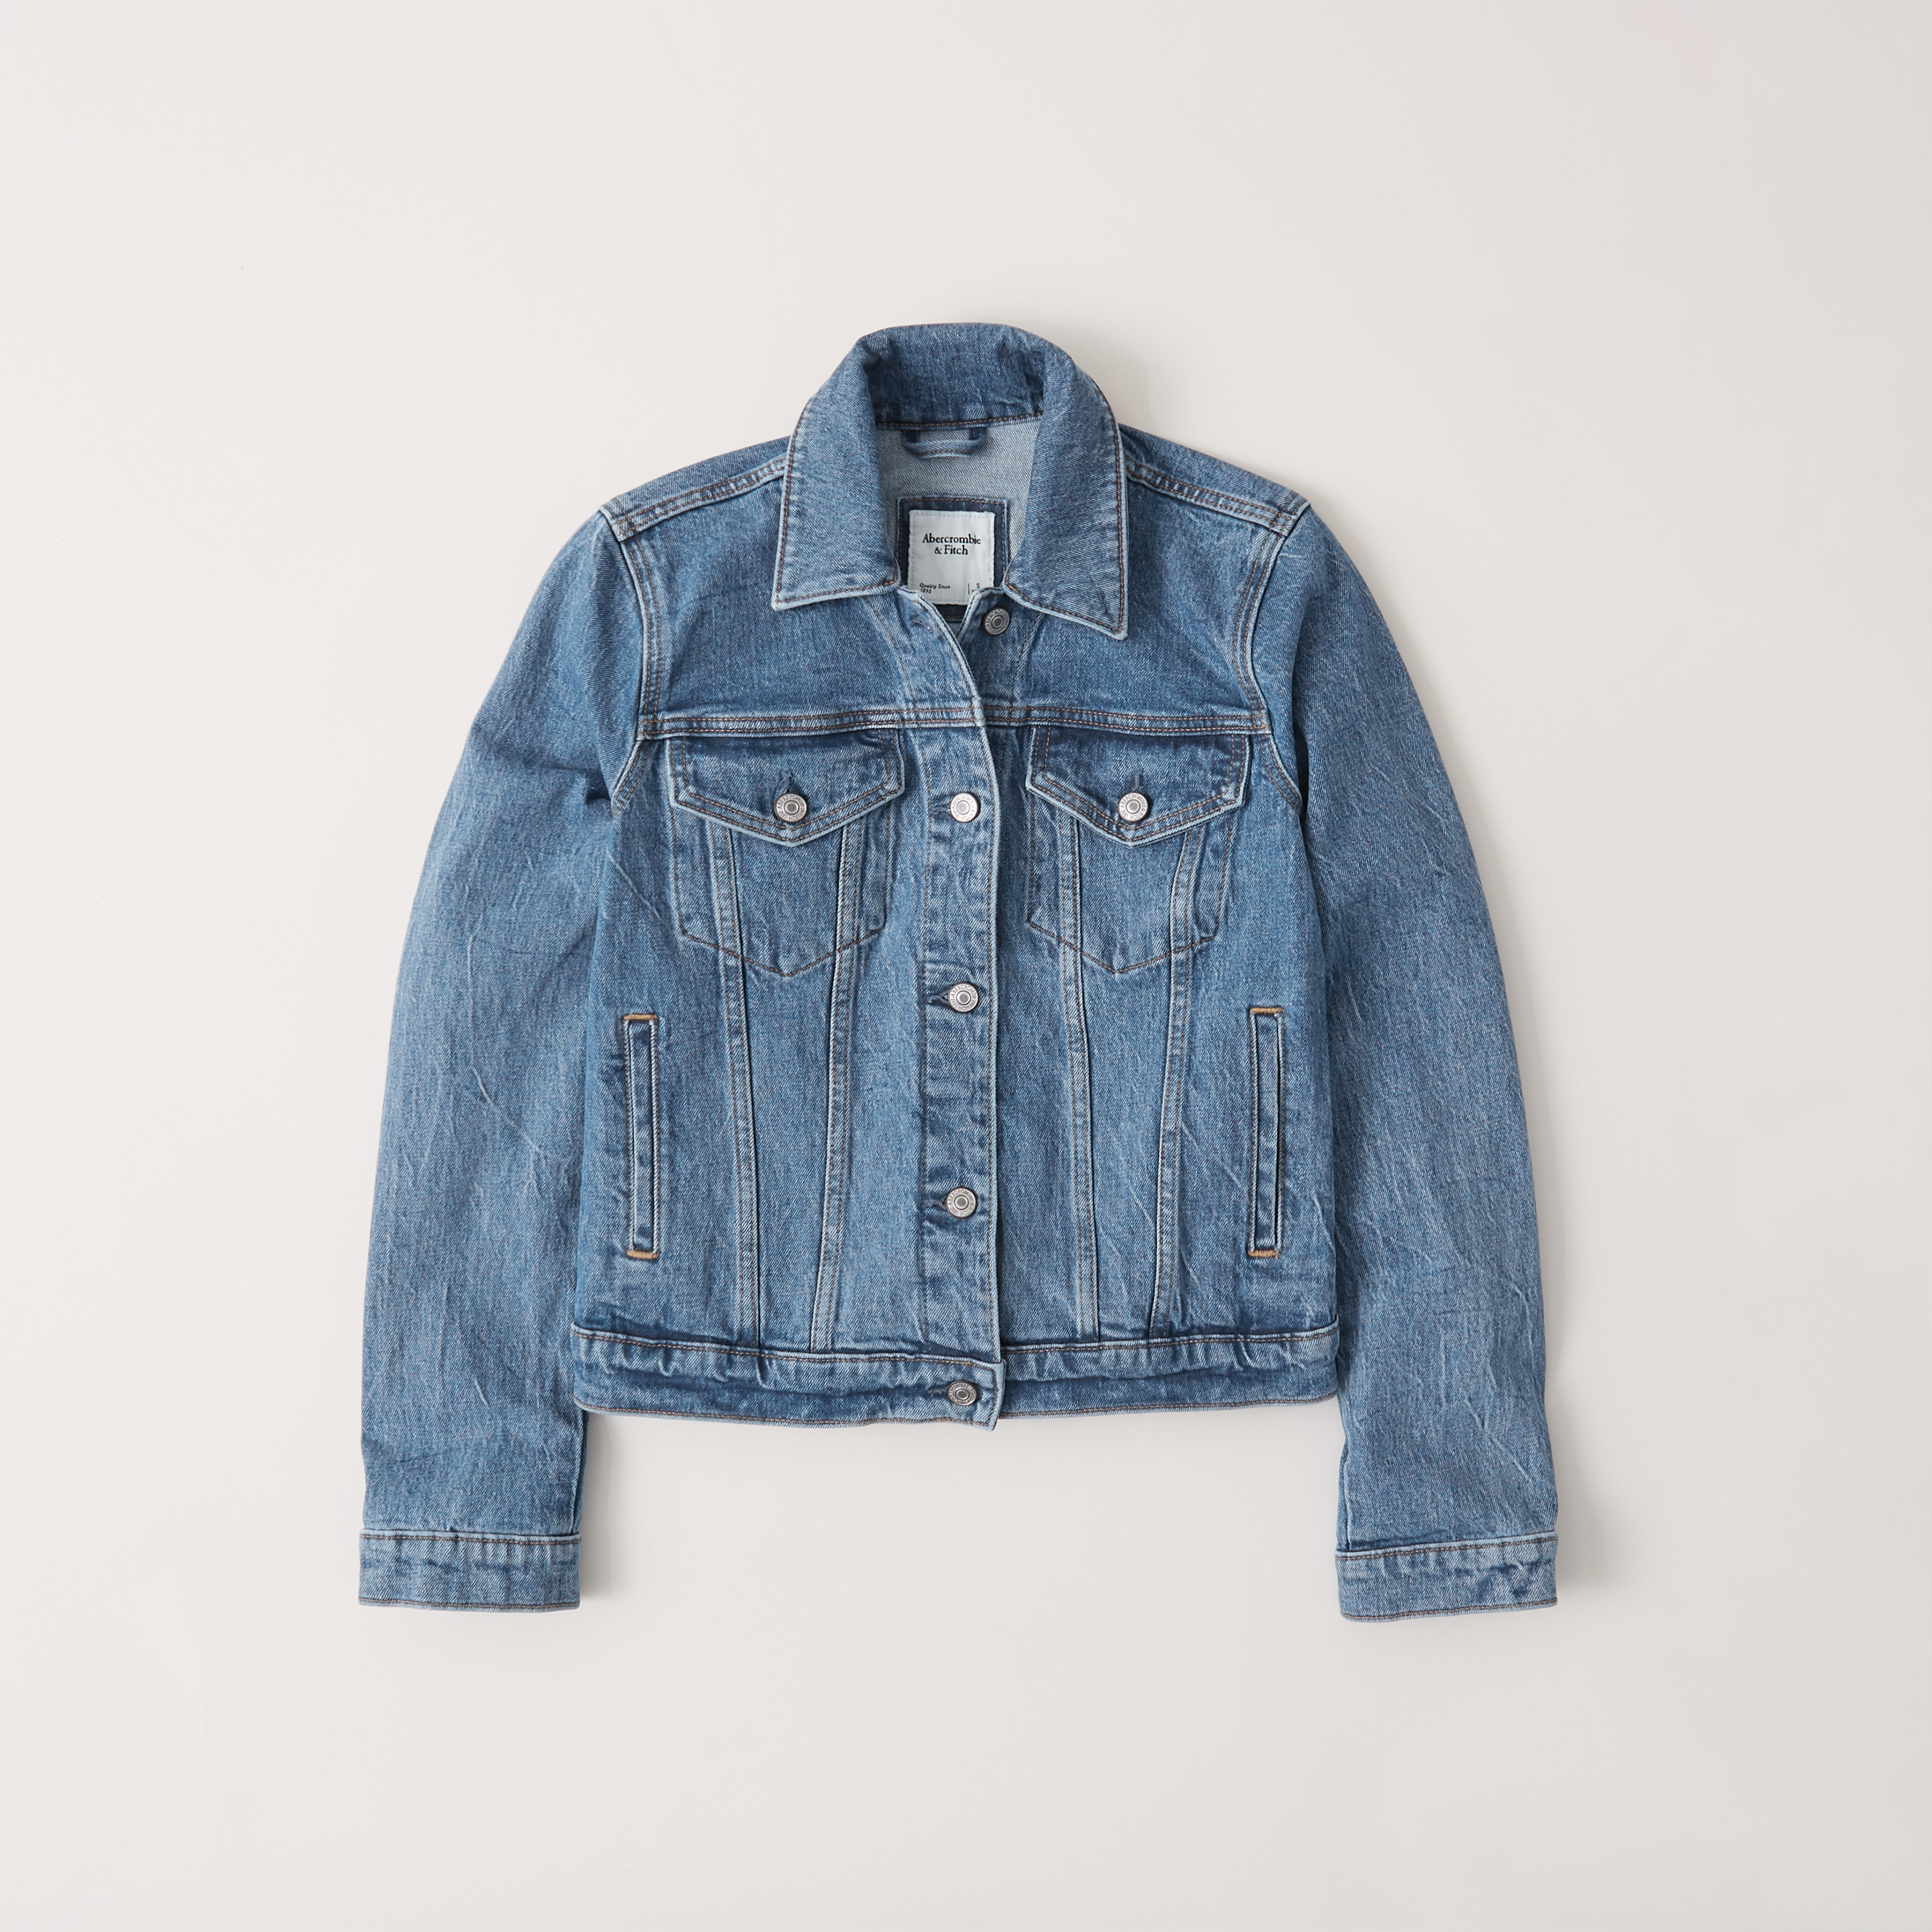 abercrombie and fitch blue jacket